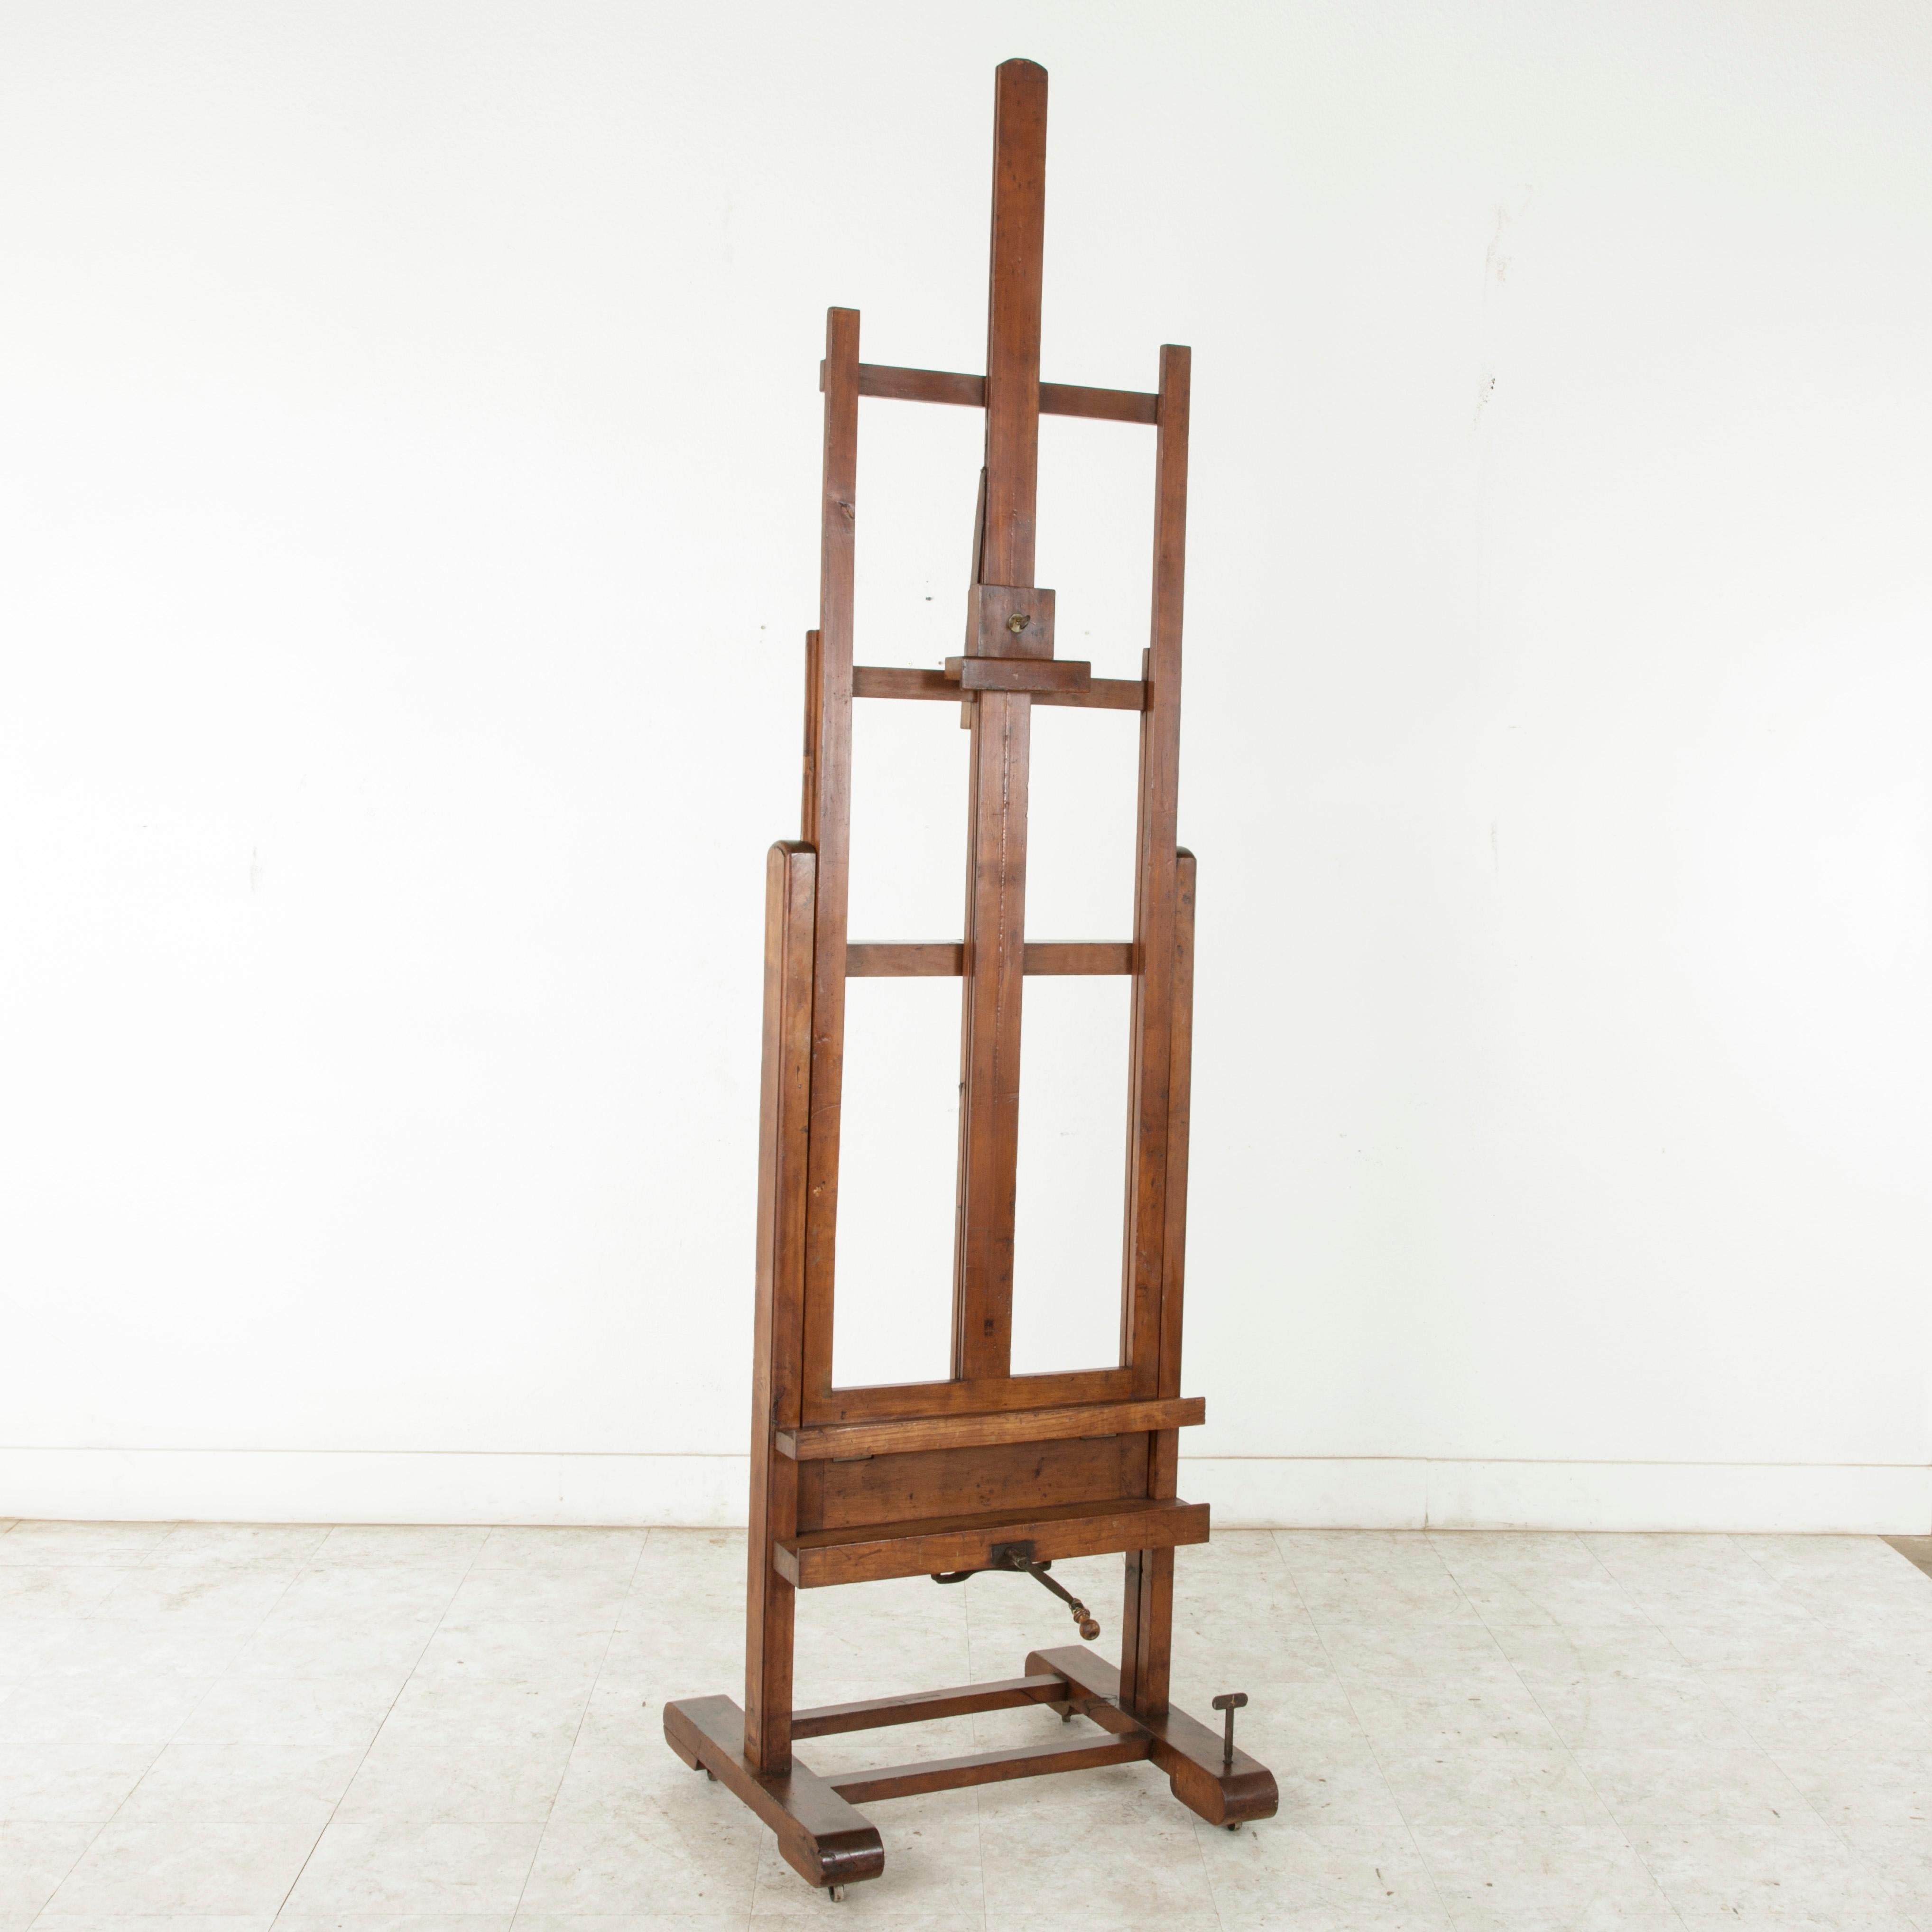 This very large cherrywood floor easel from the late 19th century was originally used in a French gallery for exhibiting art. An extraordinary find, this easel features a double mechanism, with a crank allowing for the height to be adjustable, and a